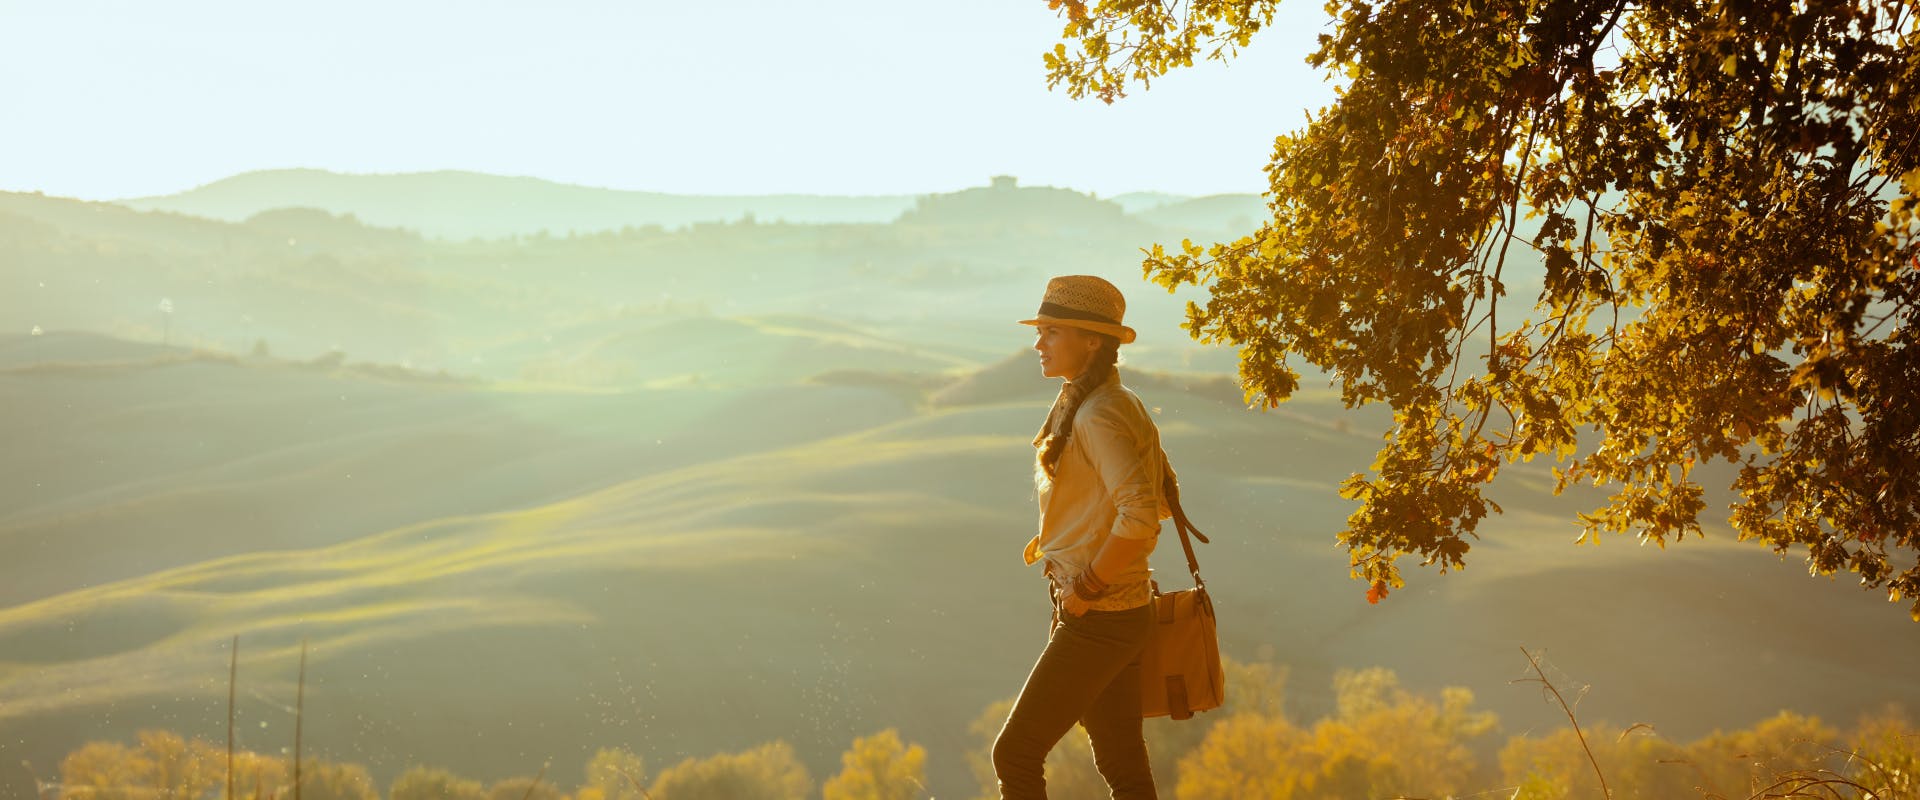 A woman walks through the hills of Tuscany.